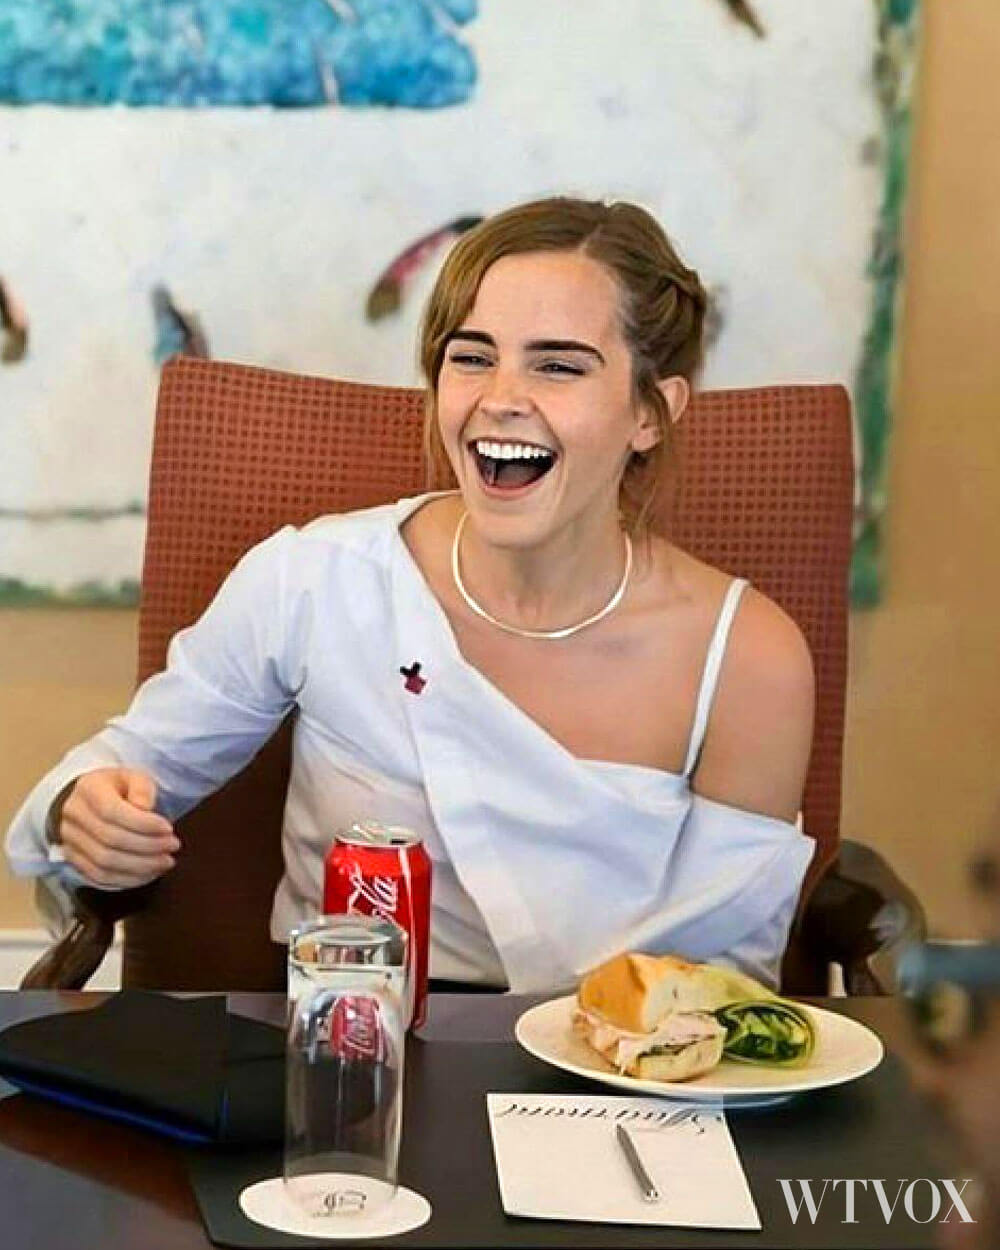 Emma Watson eating a ham sandwich and drinking a can of coca cola.